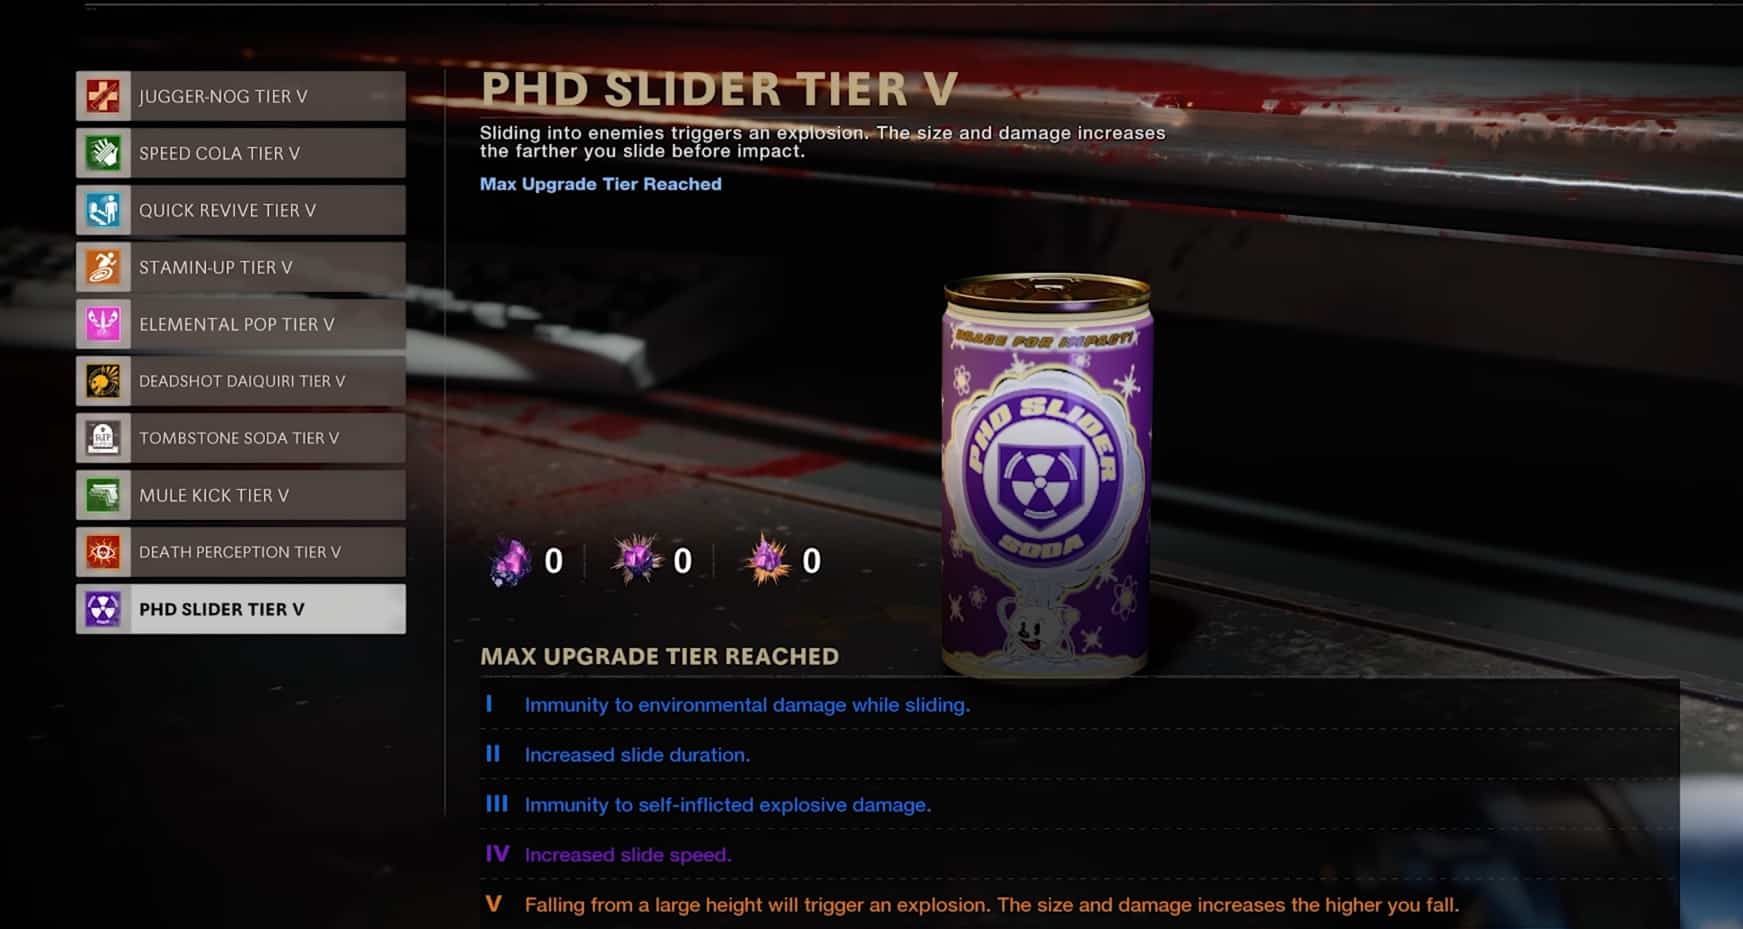 All PhD Slider tiers upgrades in Cold War Zombies